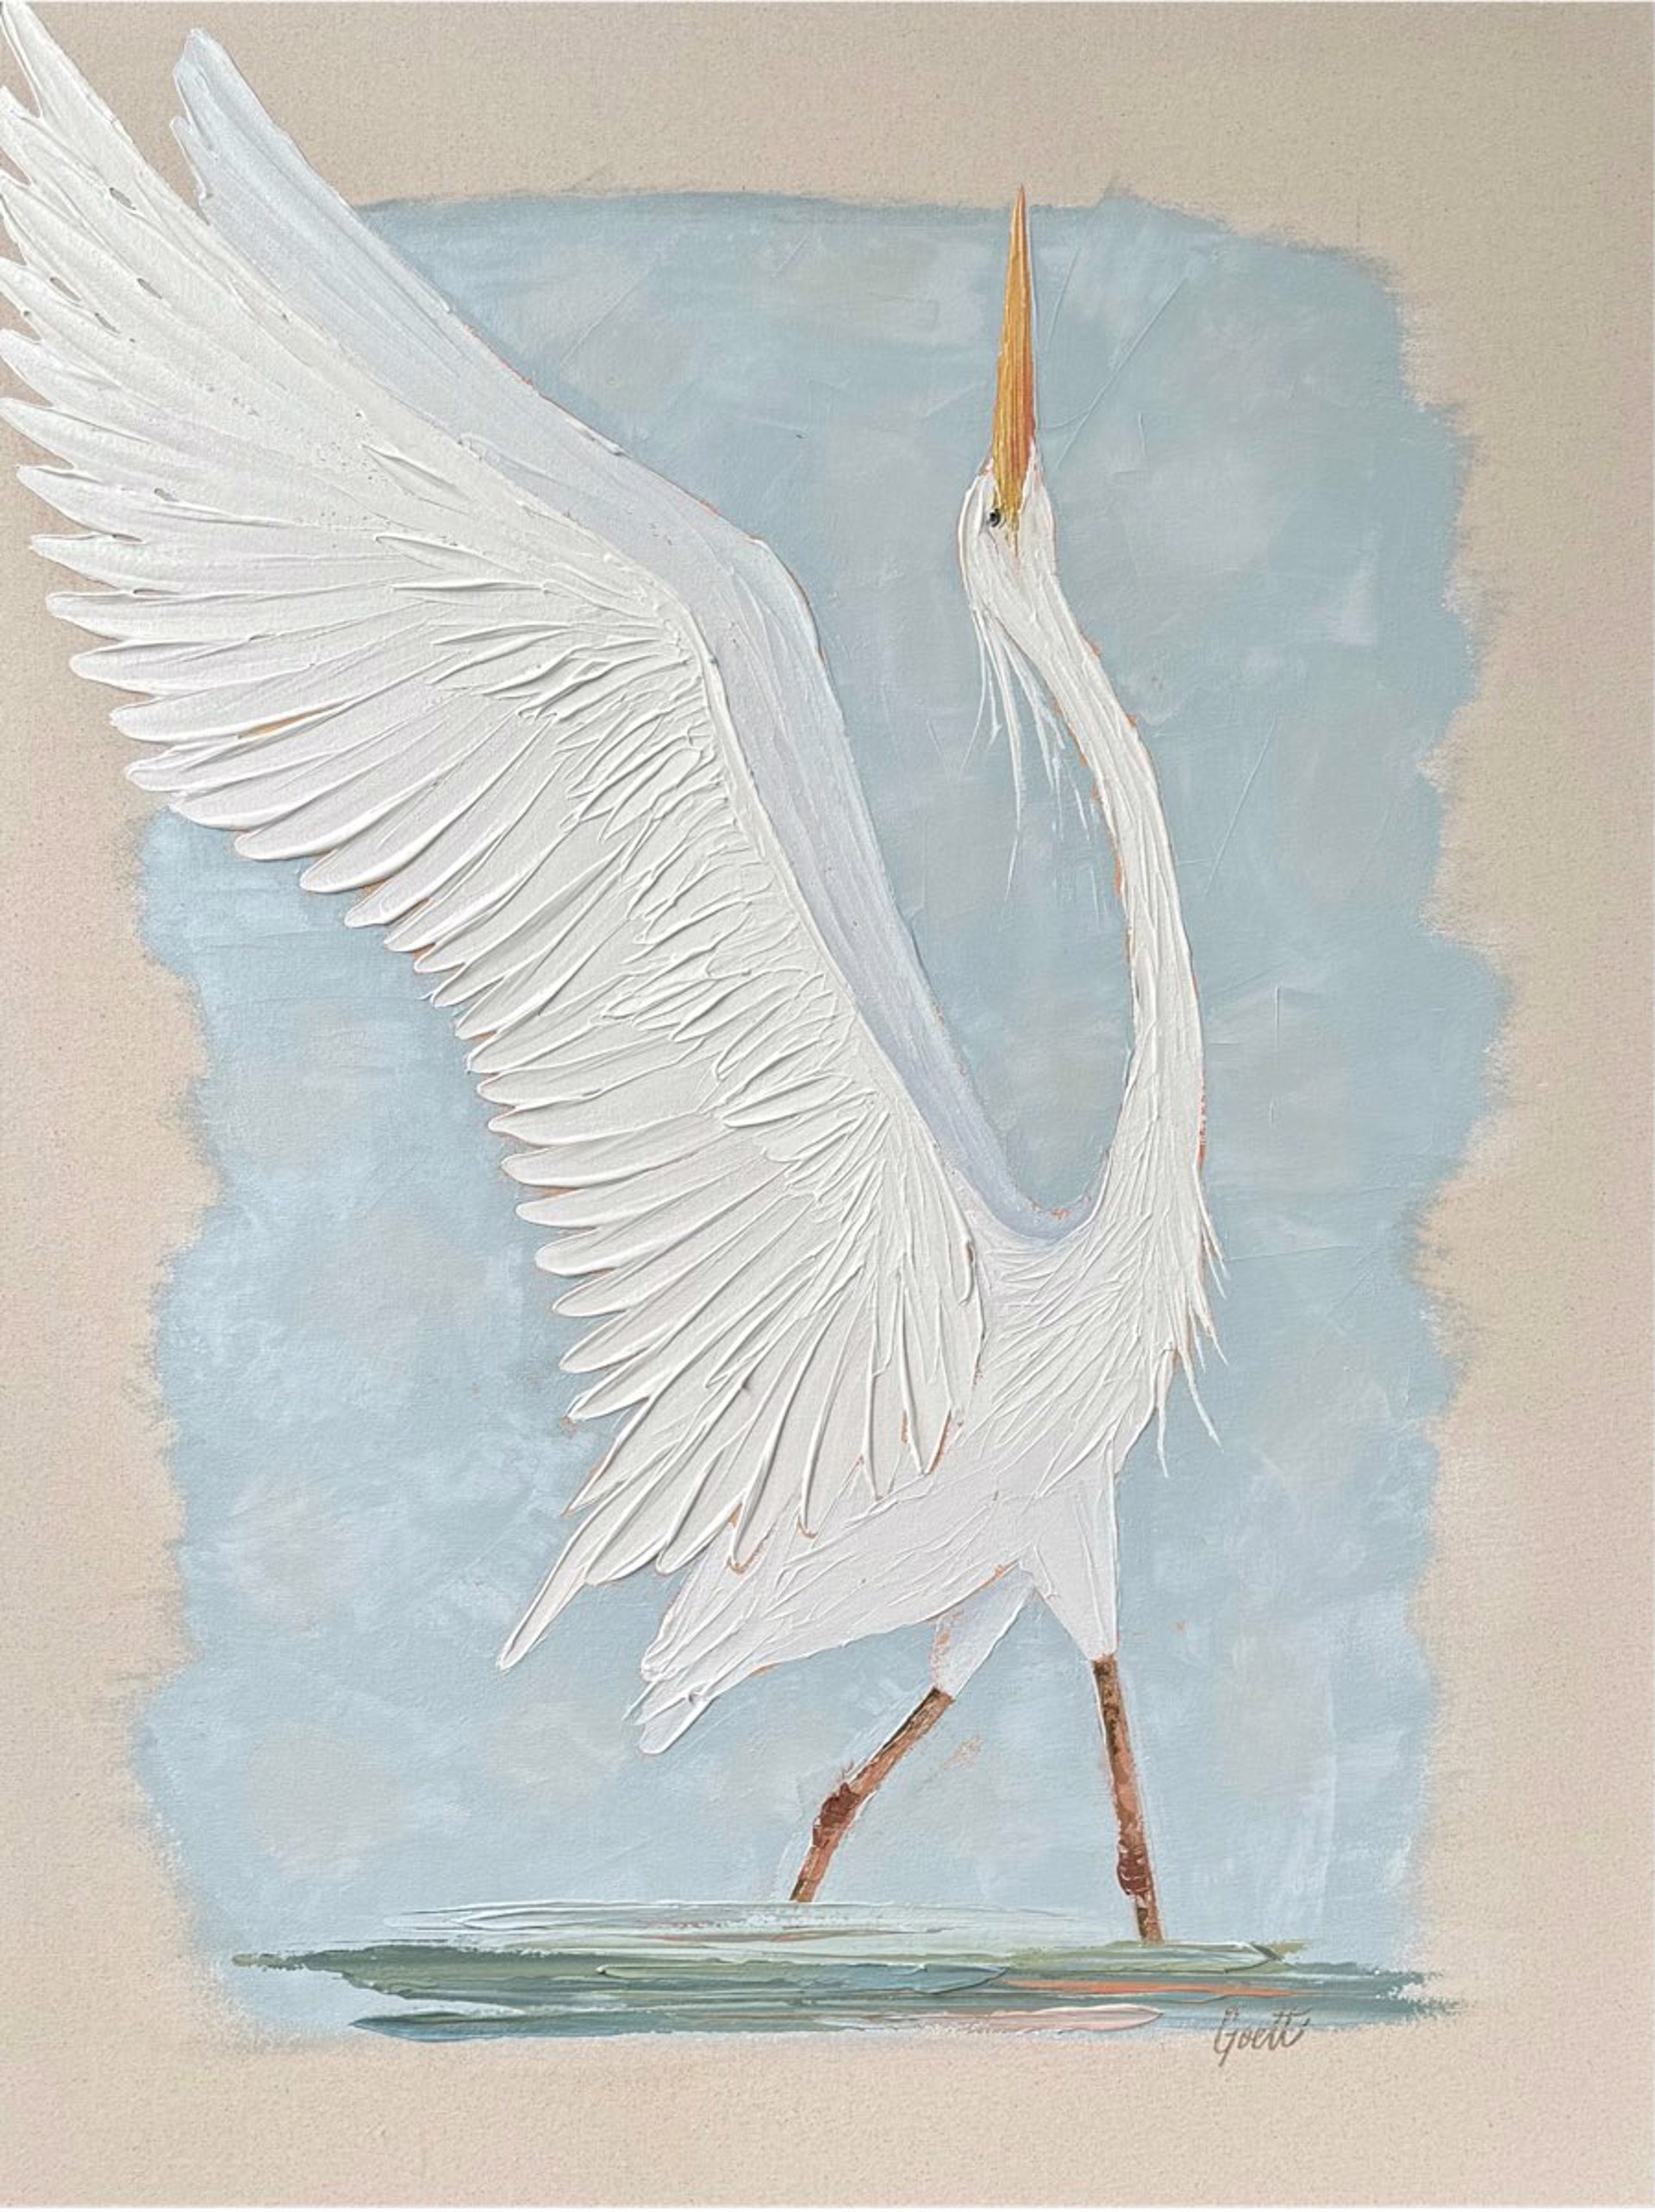 The Waltz of the Egrets (1) by Cecilia Goett